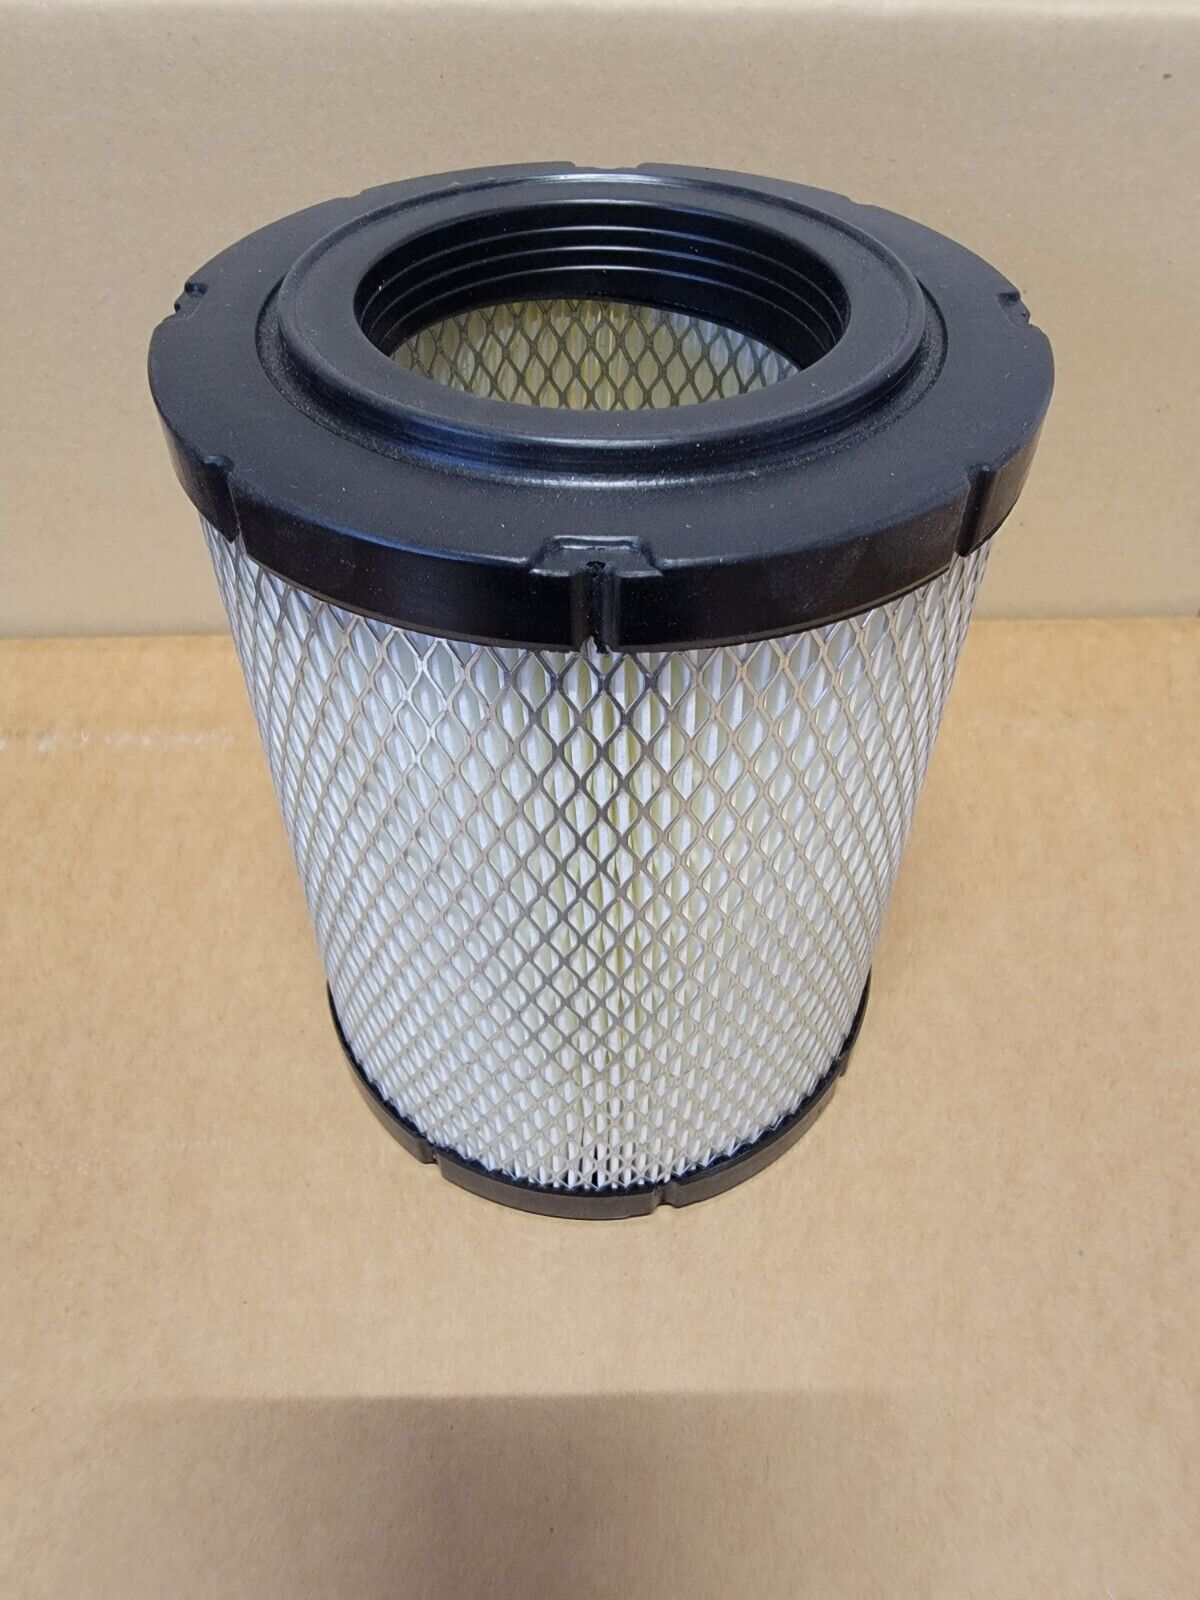 Air Filter 5433 for 2007, 2006, 2005, 2004 Buick Rainier 4.2L, 5.3L Engines